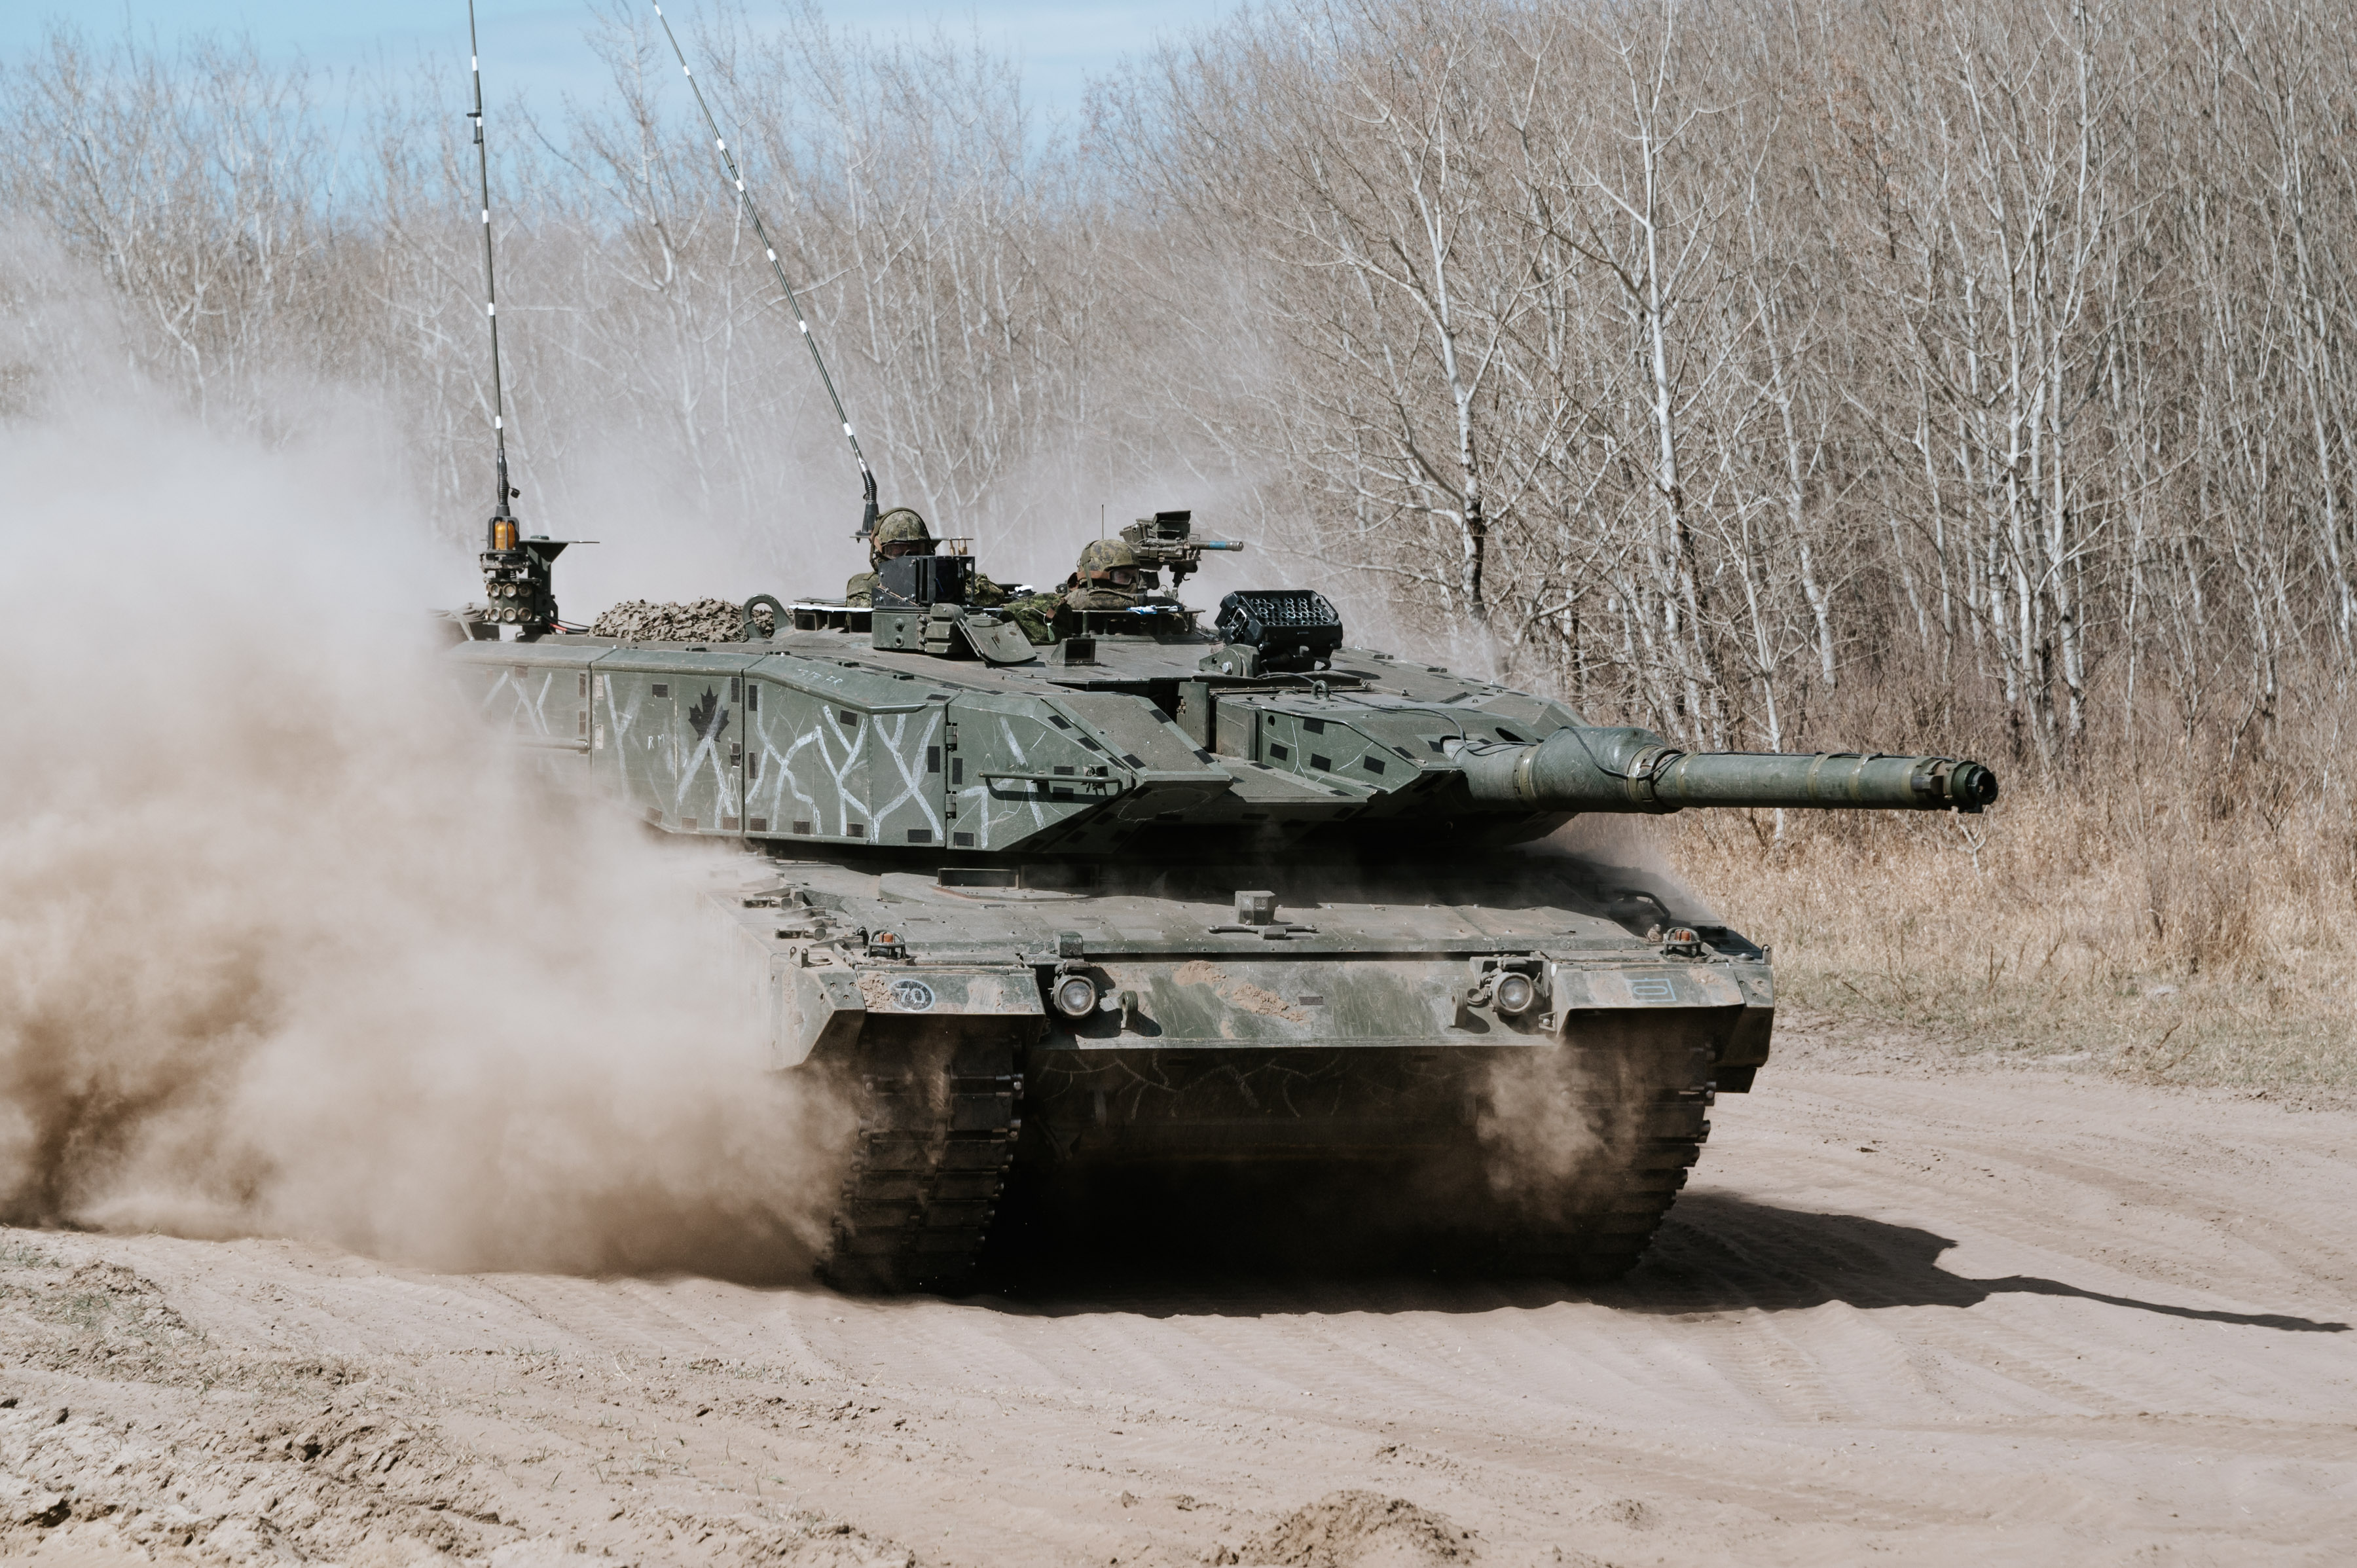 A Canadian Armed Forces Leopard 2 of Lord Strathcona's Horse drives through the training area prior the start of exercise MAPLE RESOLVE 21.